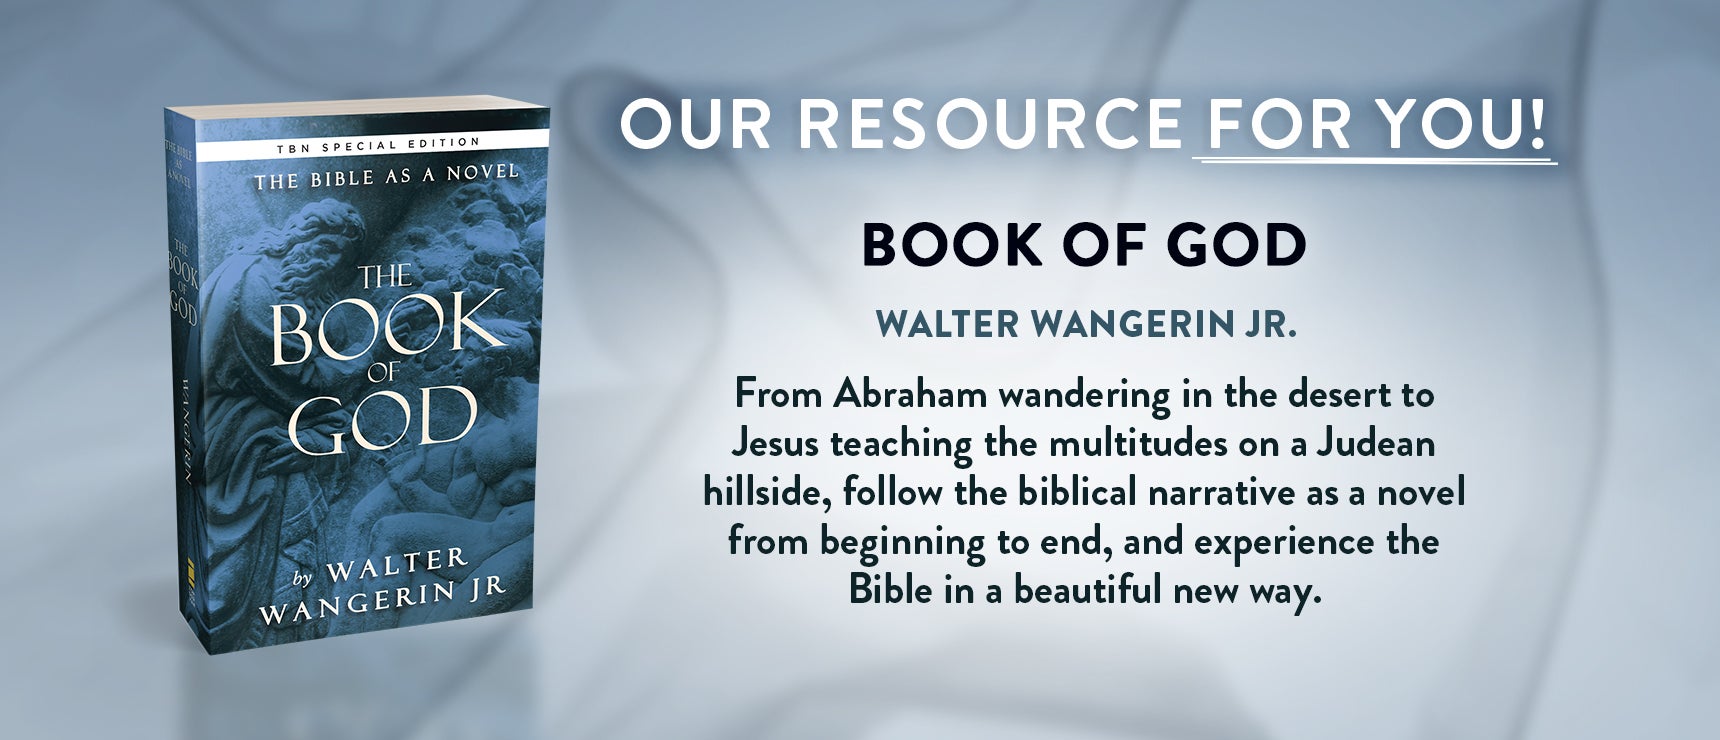 The Book of God by Walter Wangerin from TBN